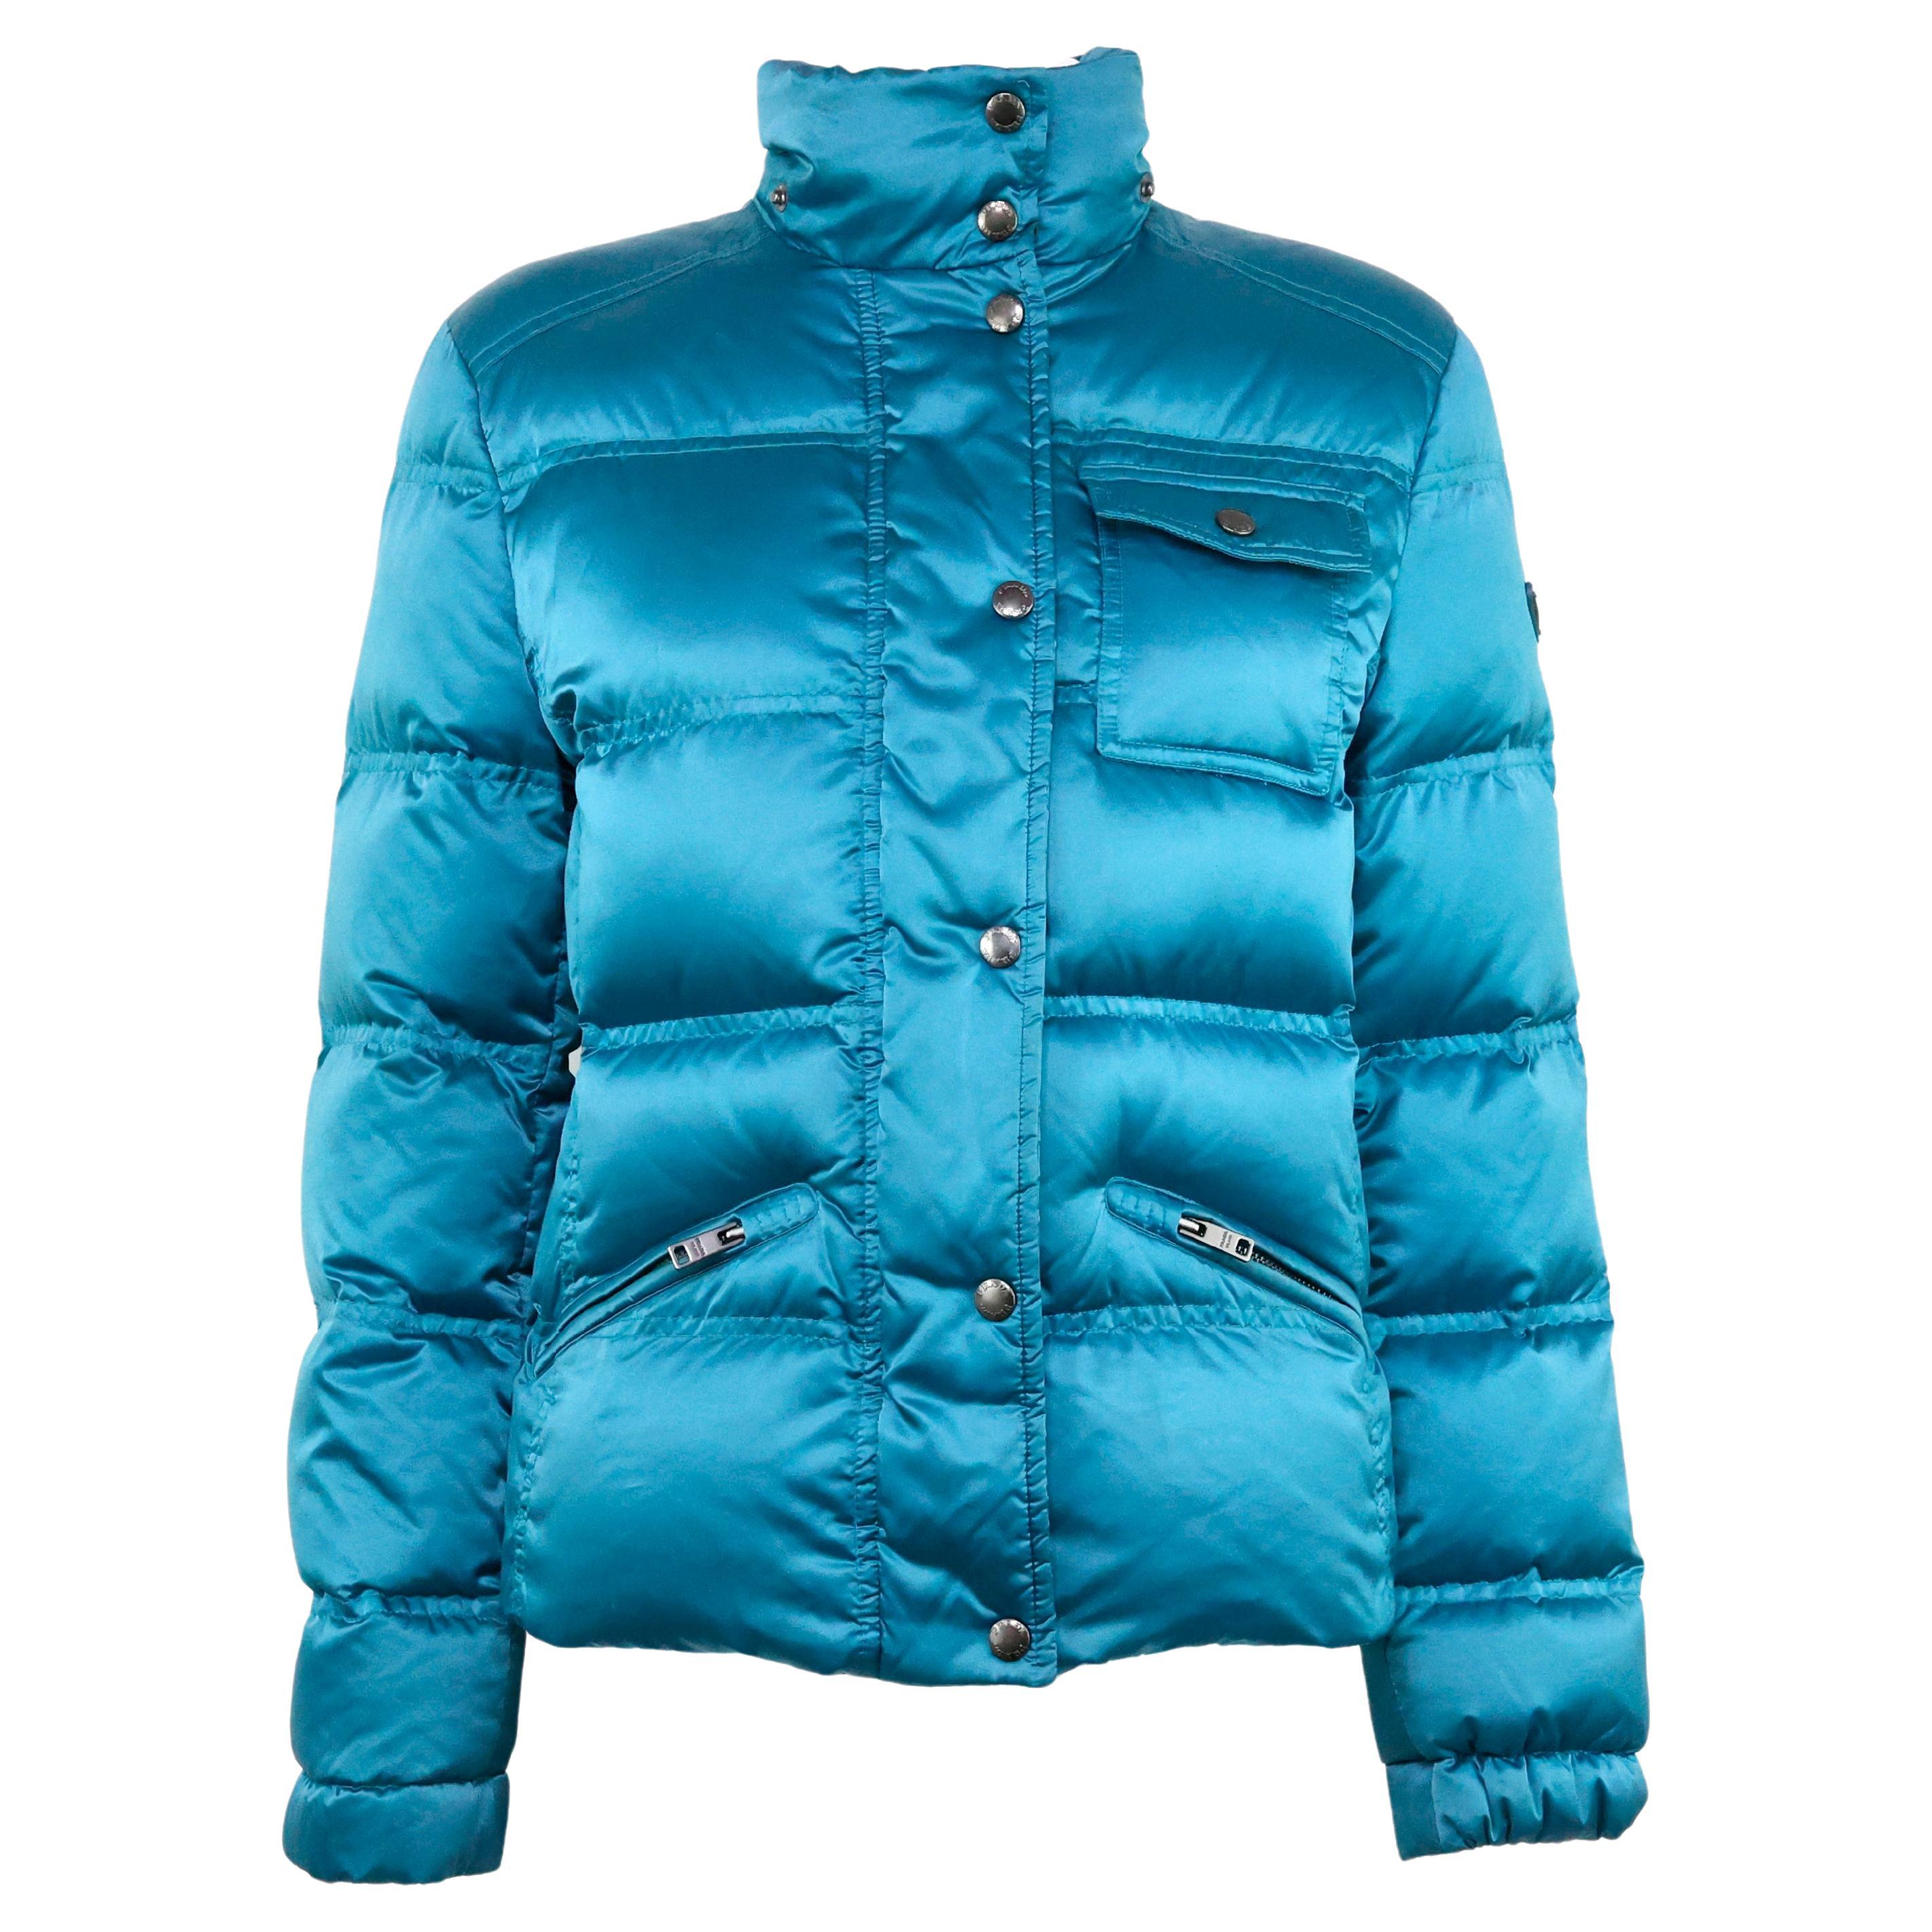 Prada Triangle Logo Puffer Jacket in Turquoise Satin For Sale